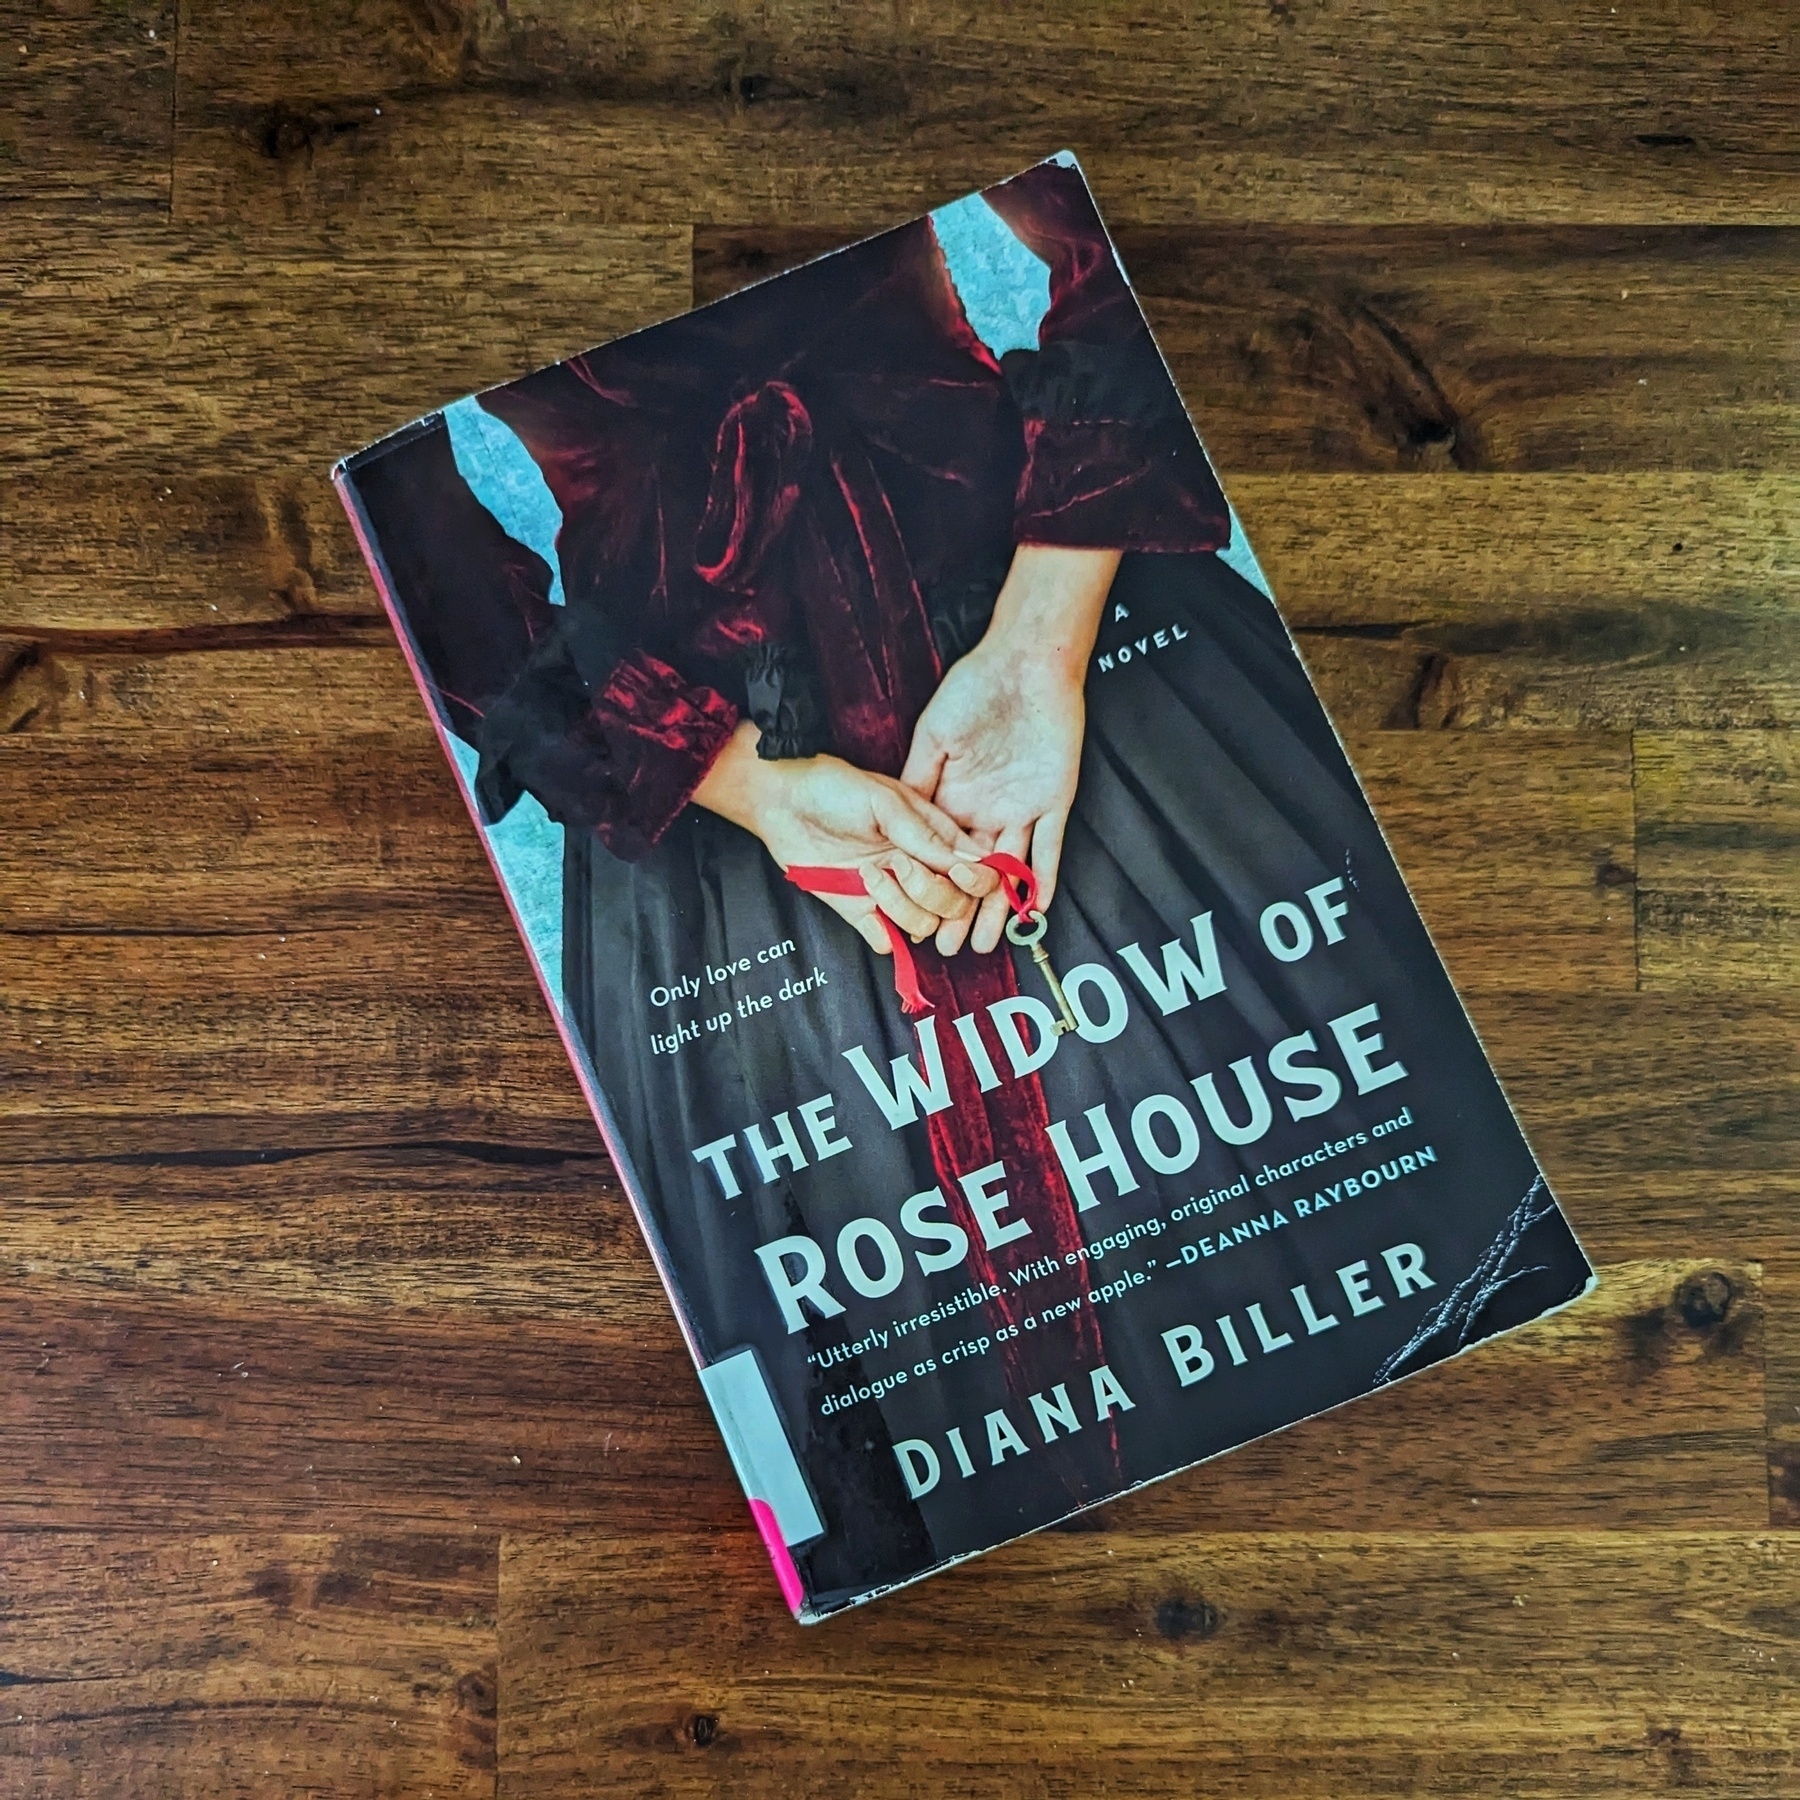 The cover of the novel The Widow of Rose House